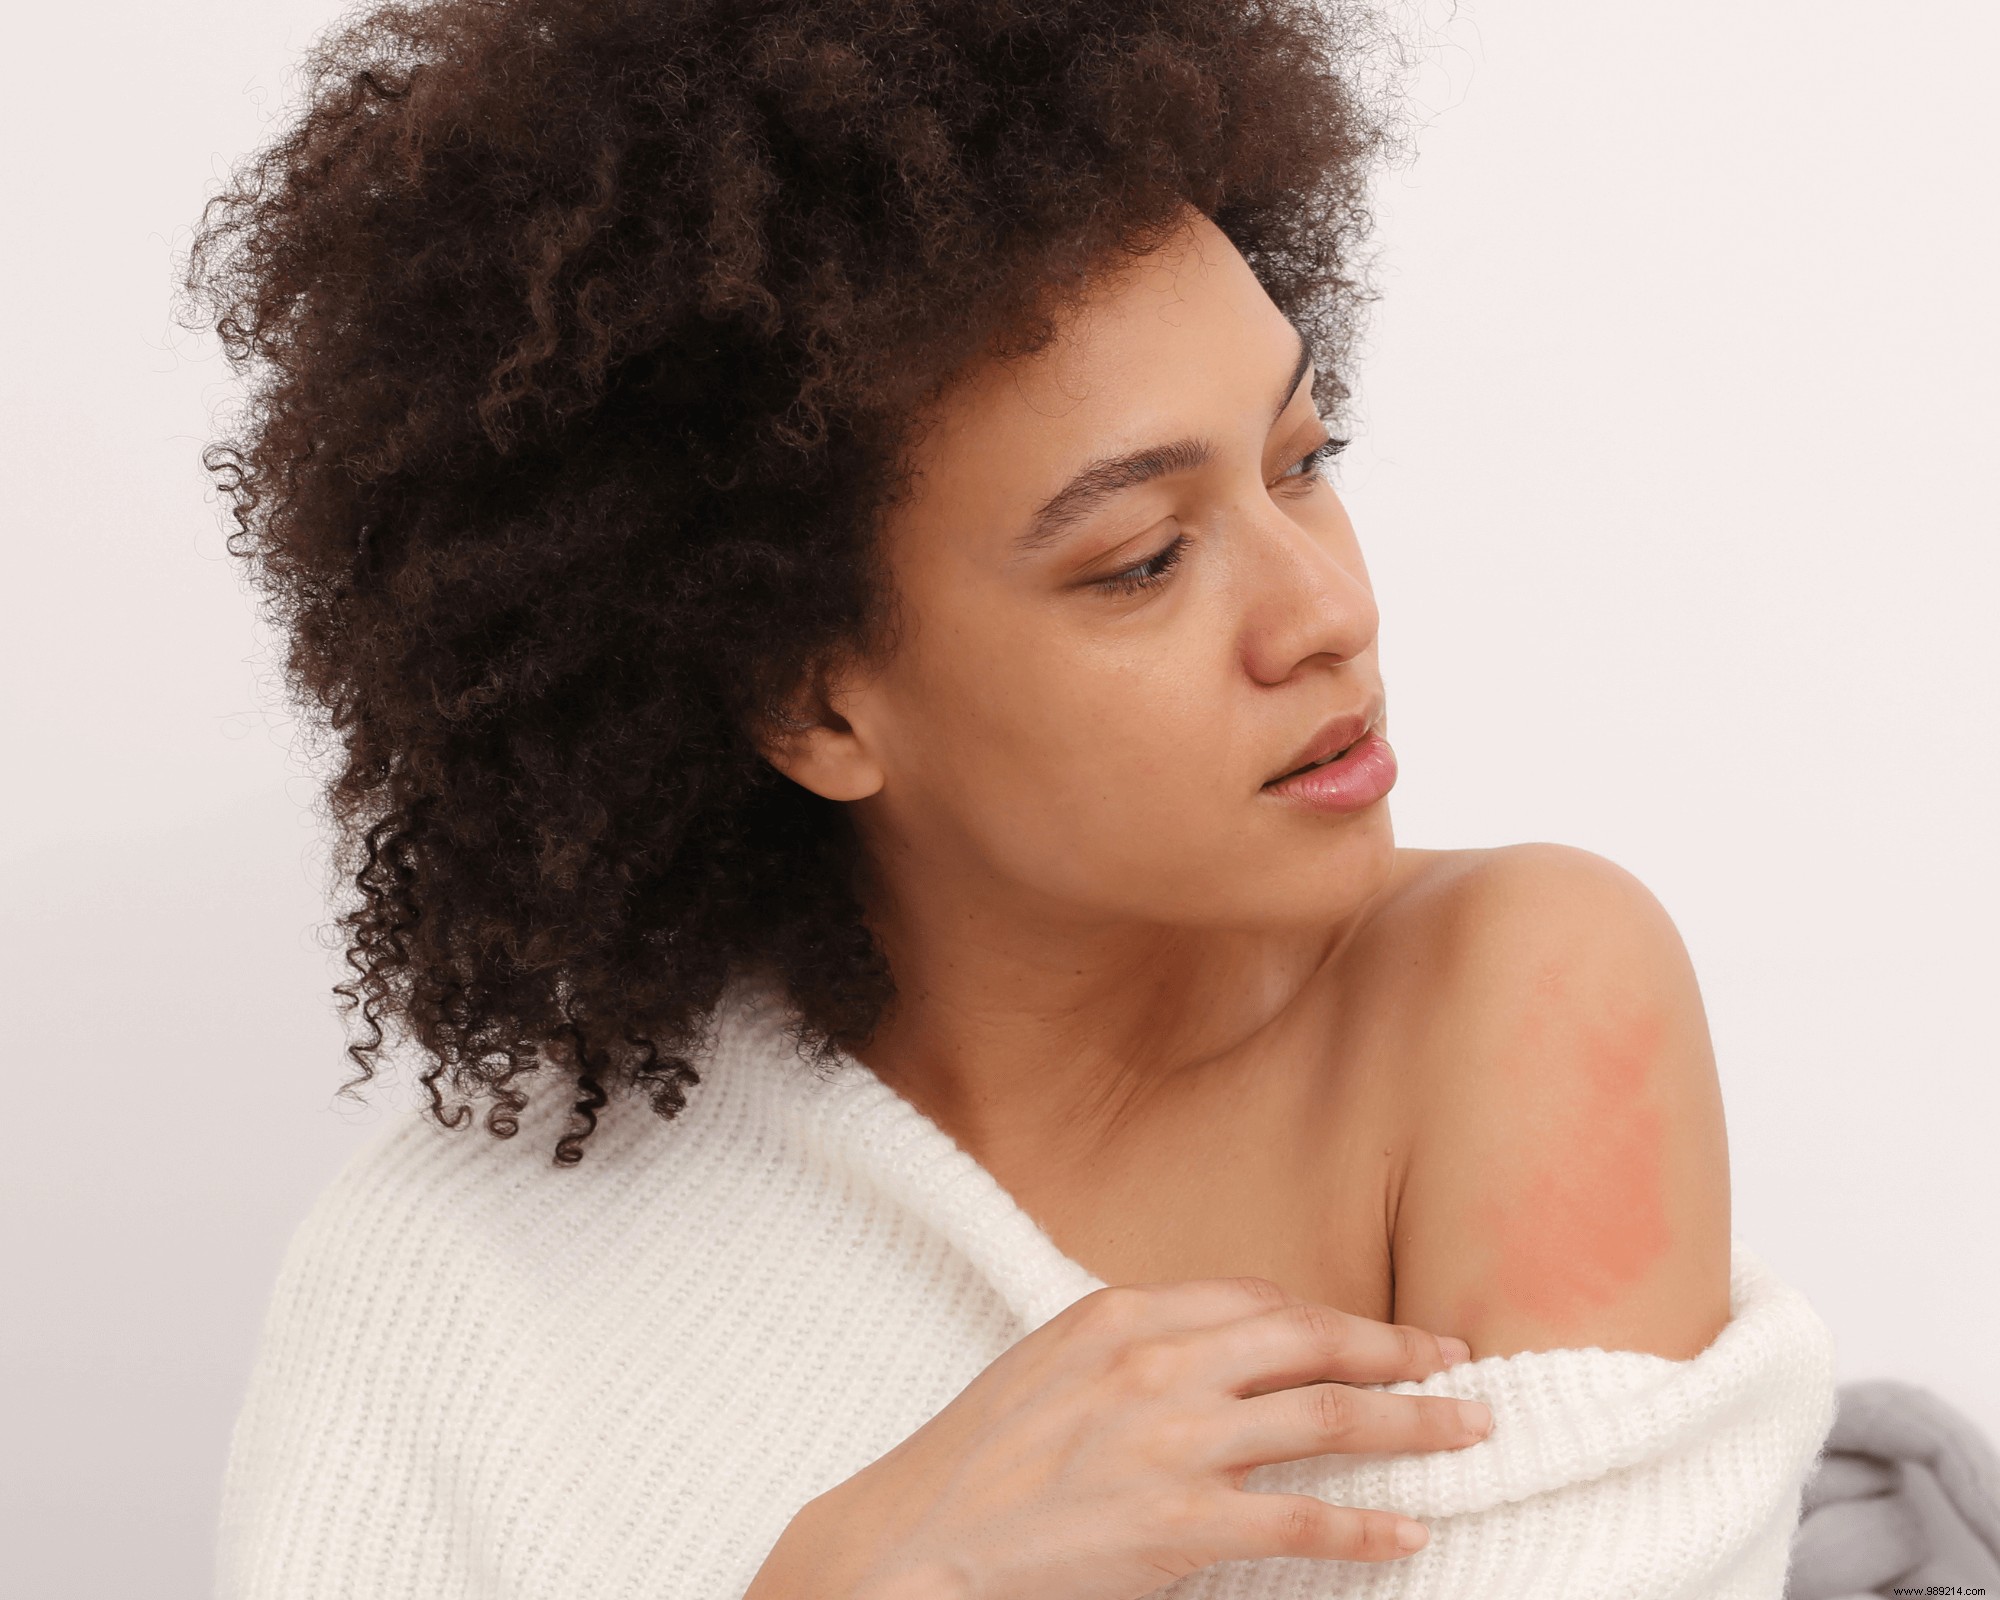 Sensitive skin:how to soothe it? 